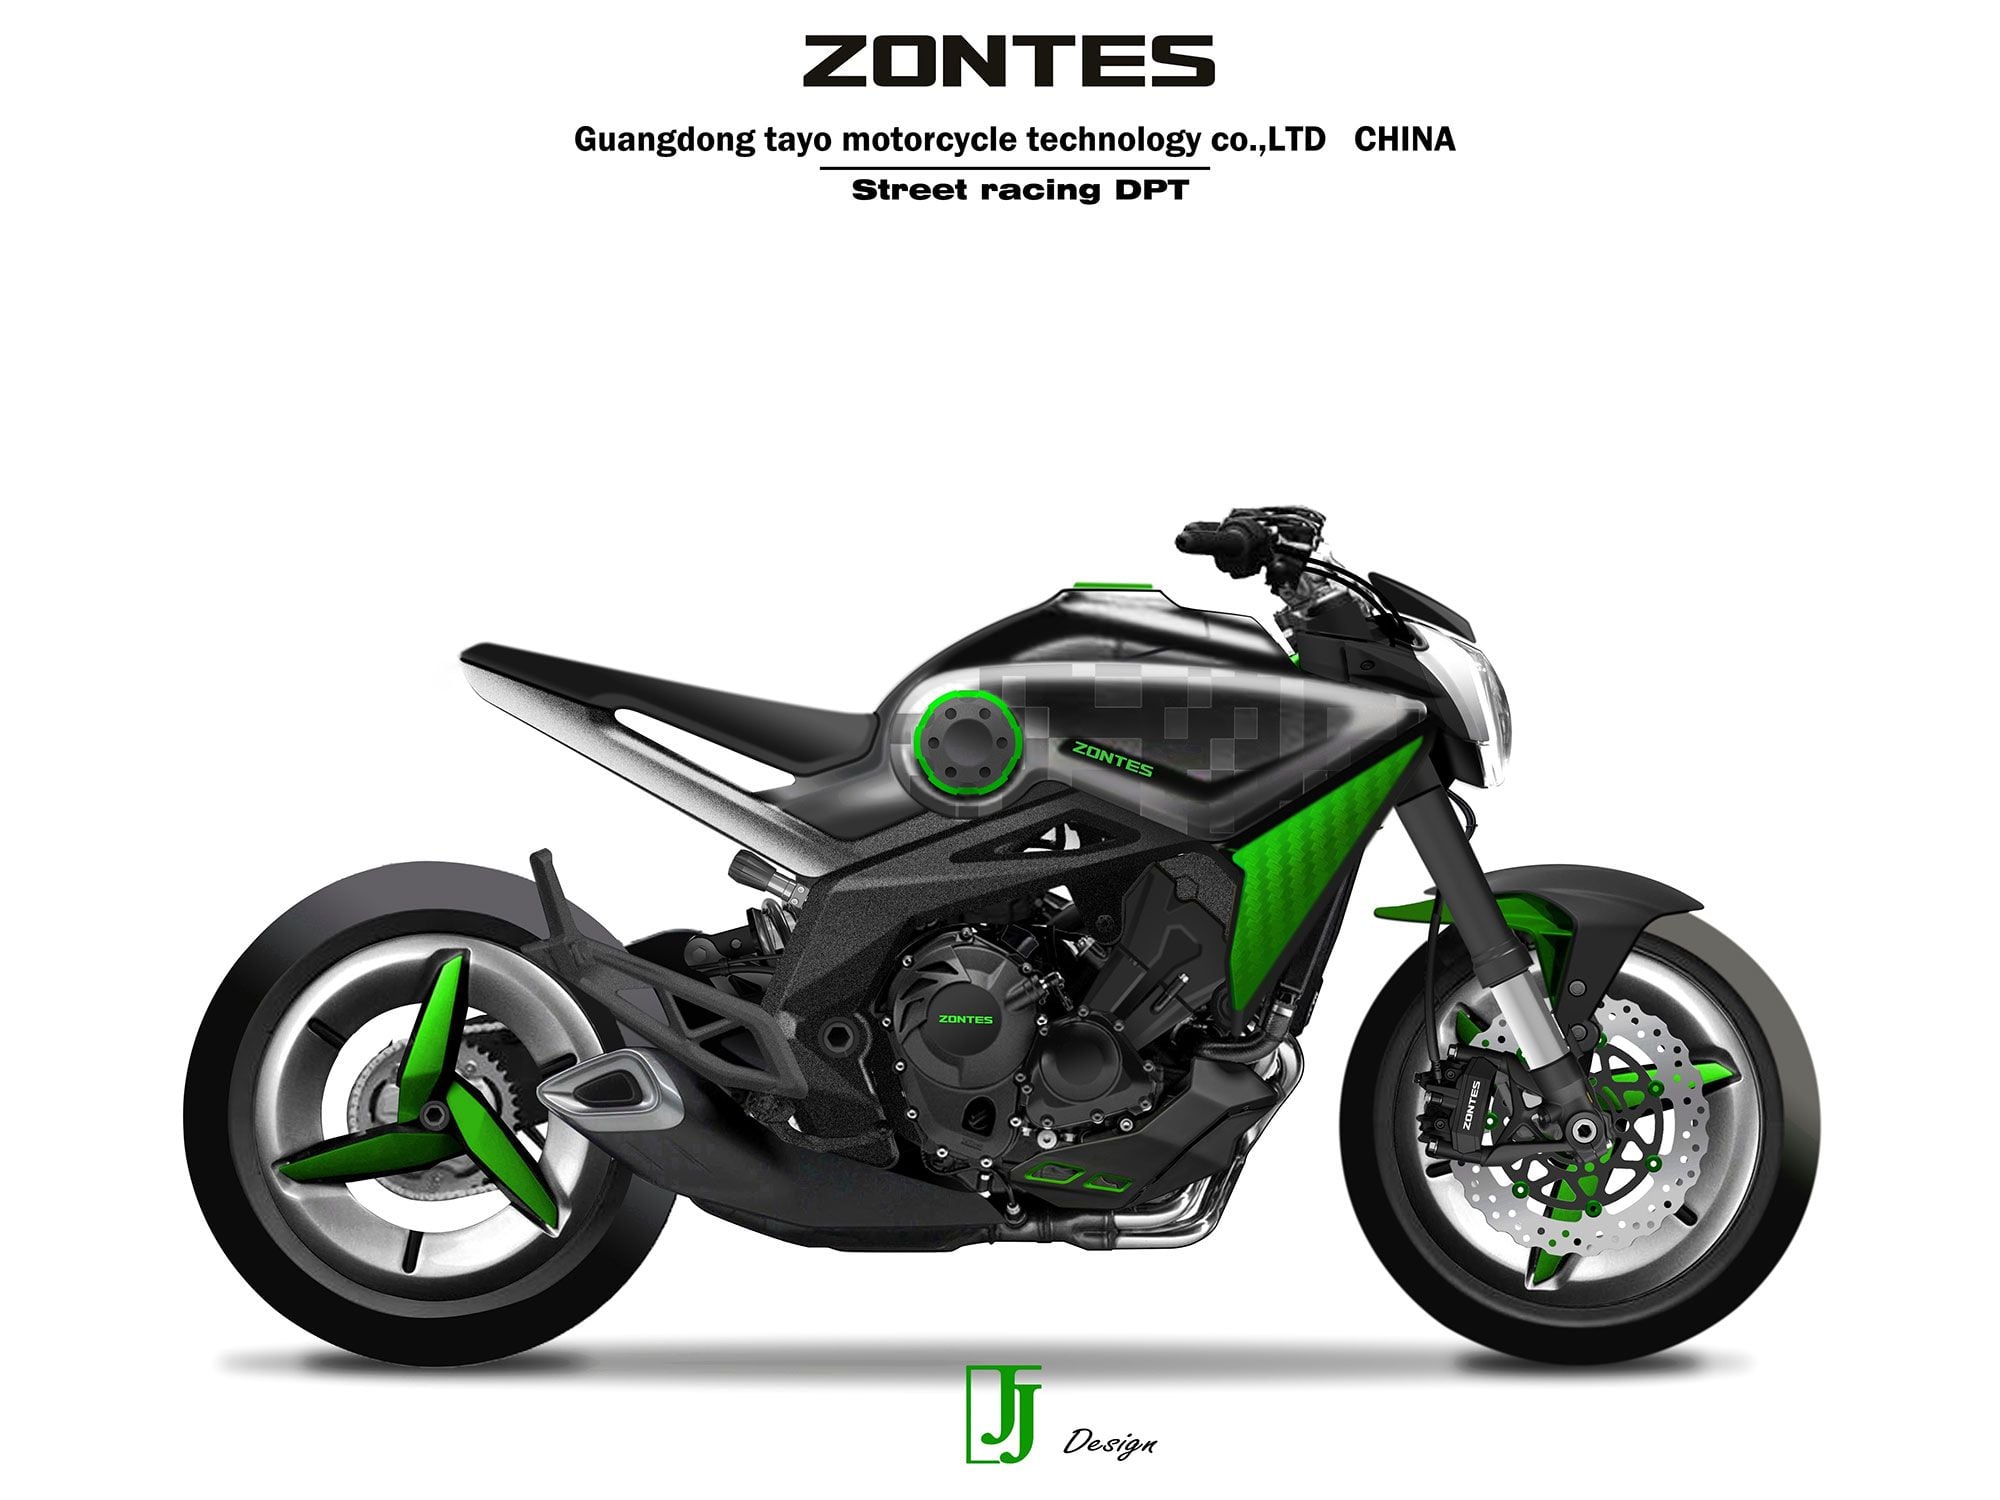 Zontes first floated the idea of the triple-powered 1,000cc naked in this design sketch last year.